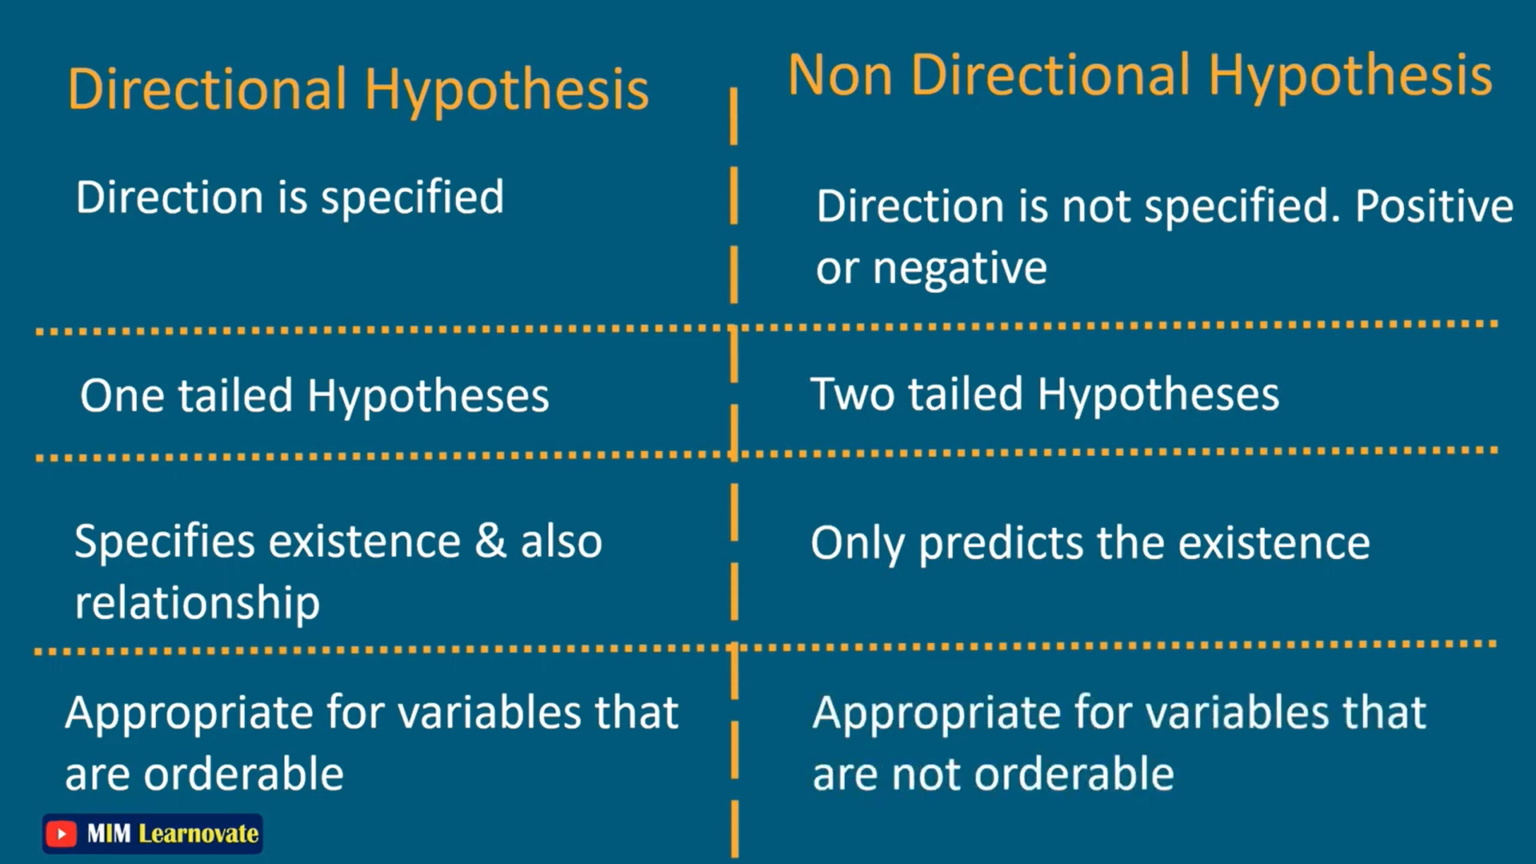 non directional hypothesis in research meaning